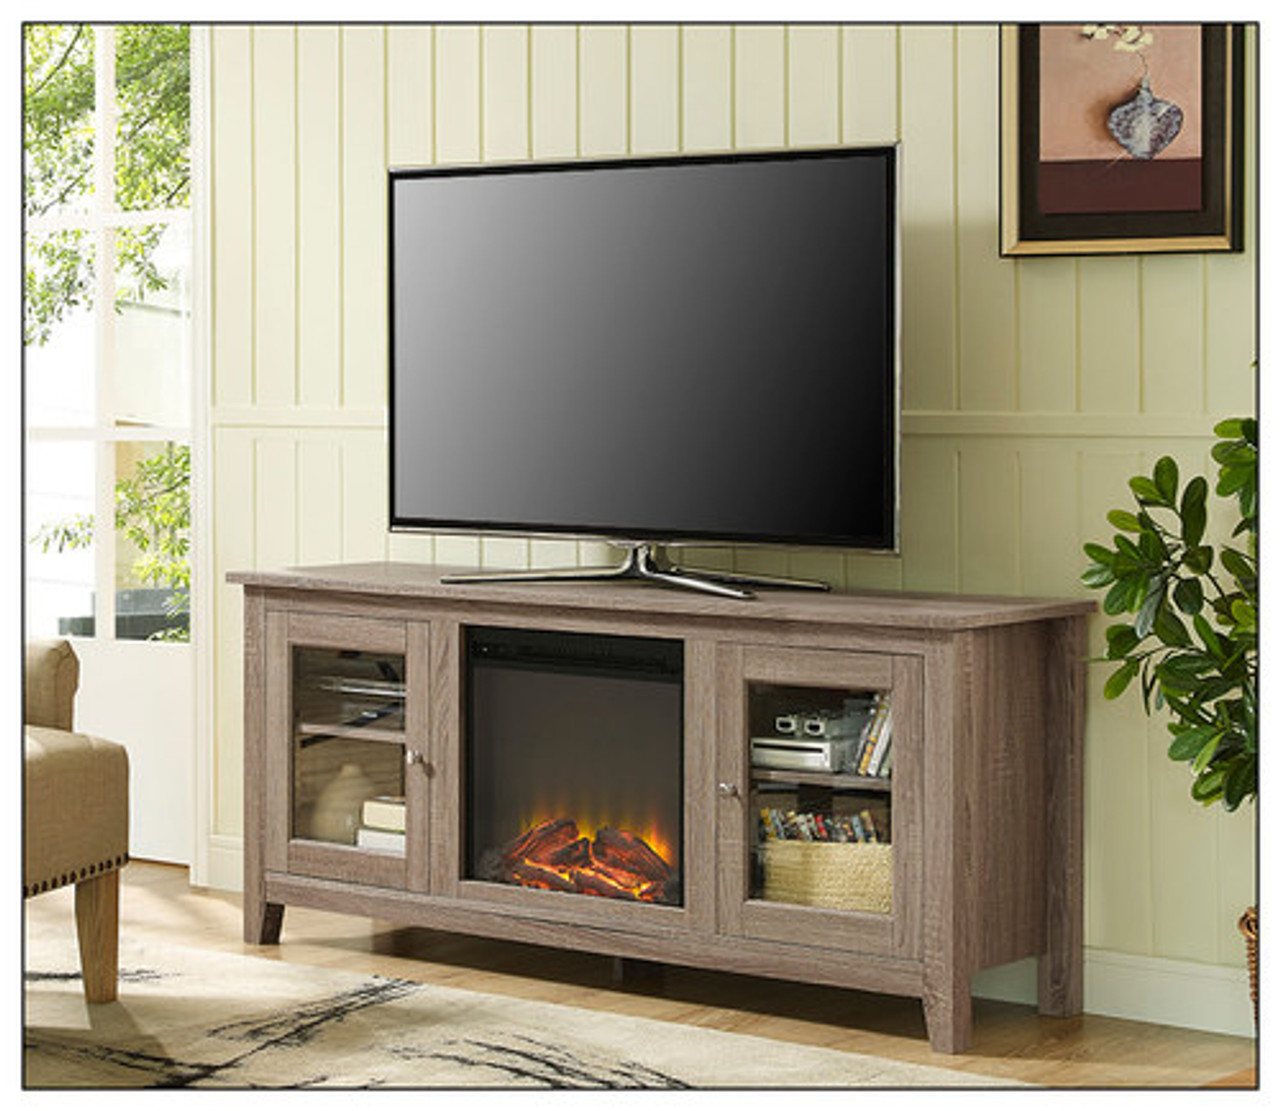 Walker Edison - Fireplace TV Console for Most TVs Up to 60" - Driftwood